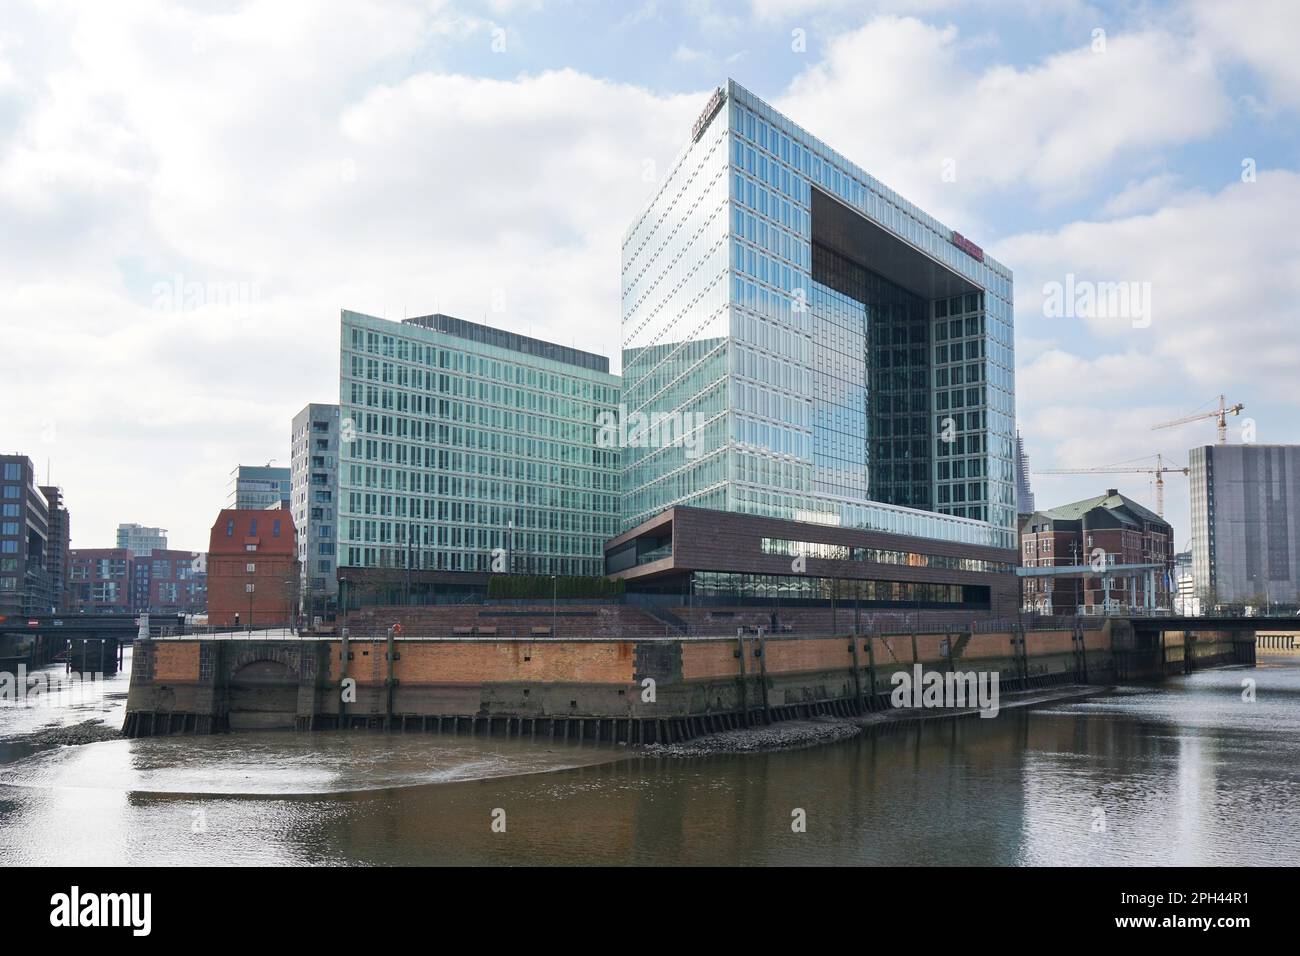 Hamburg, Germany - March 12, 2016: Headquarter of German magazine and publishing house Der Spiegel at Ericusspitze in Hafencity district Stock Photo